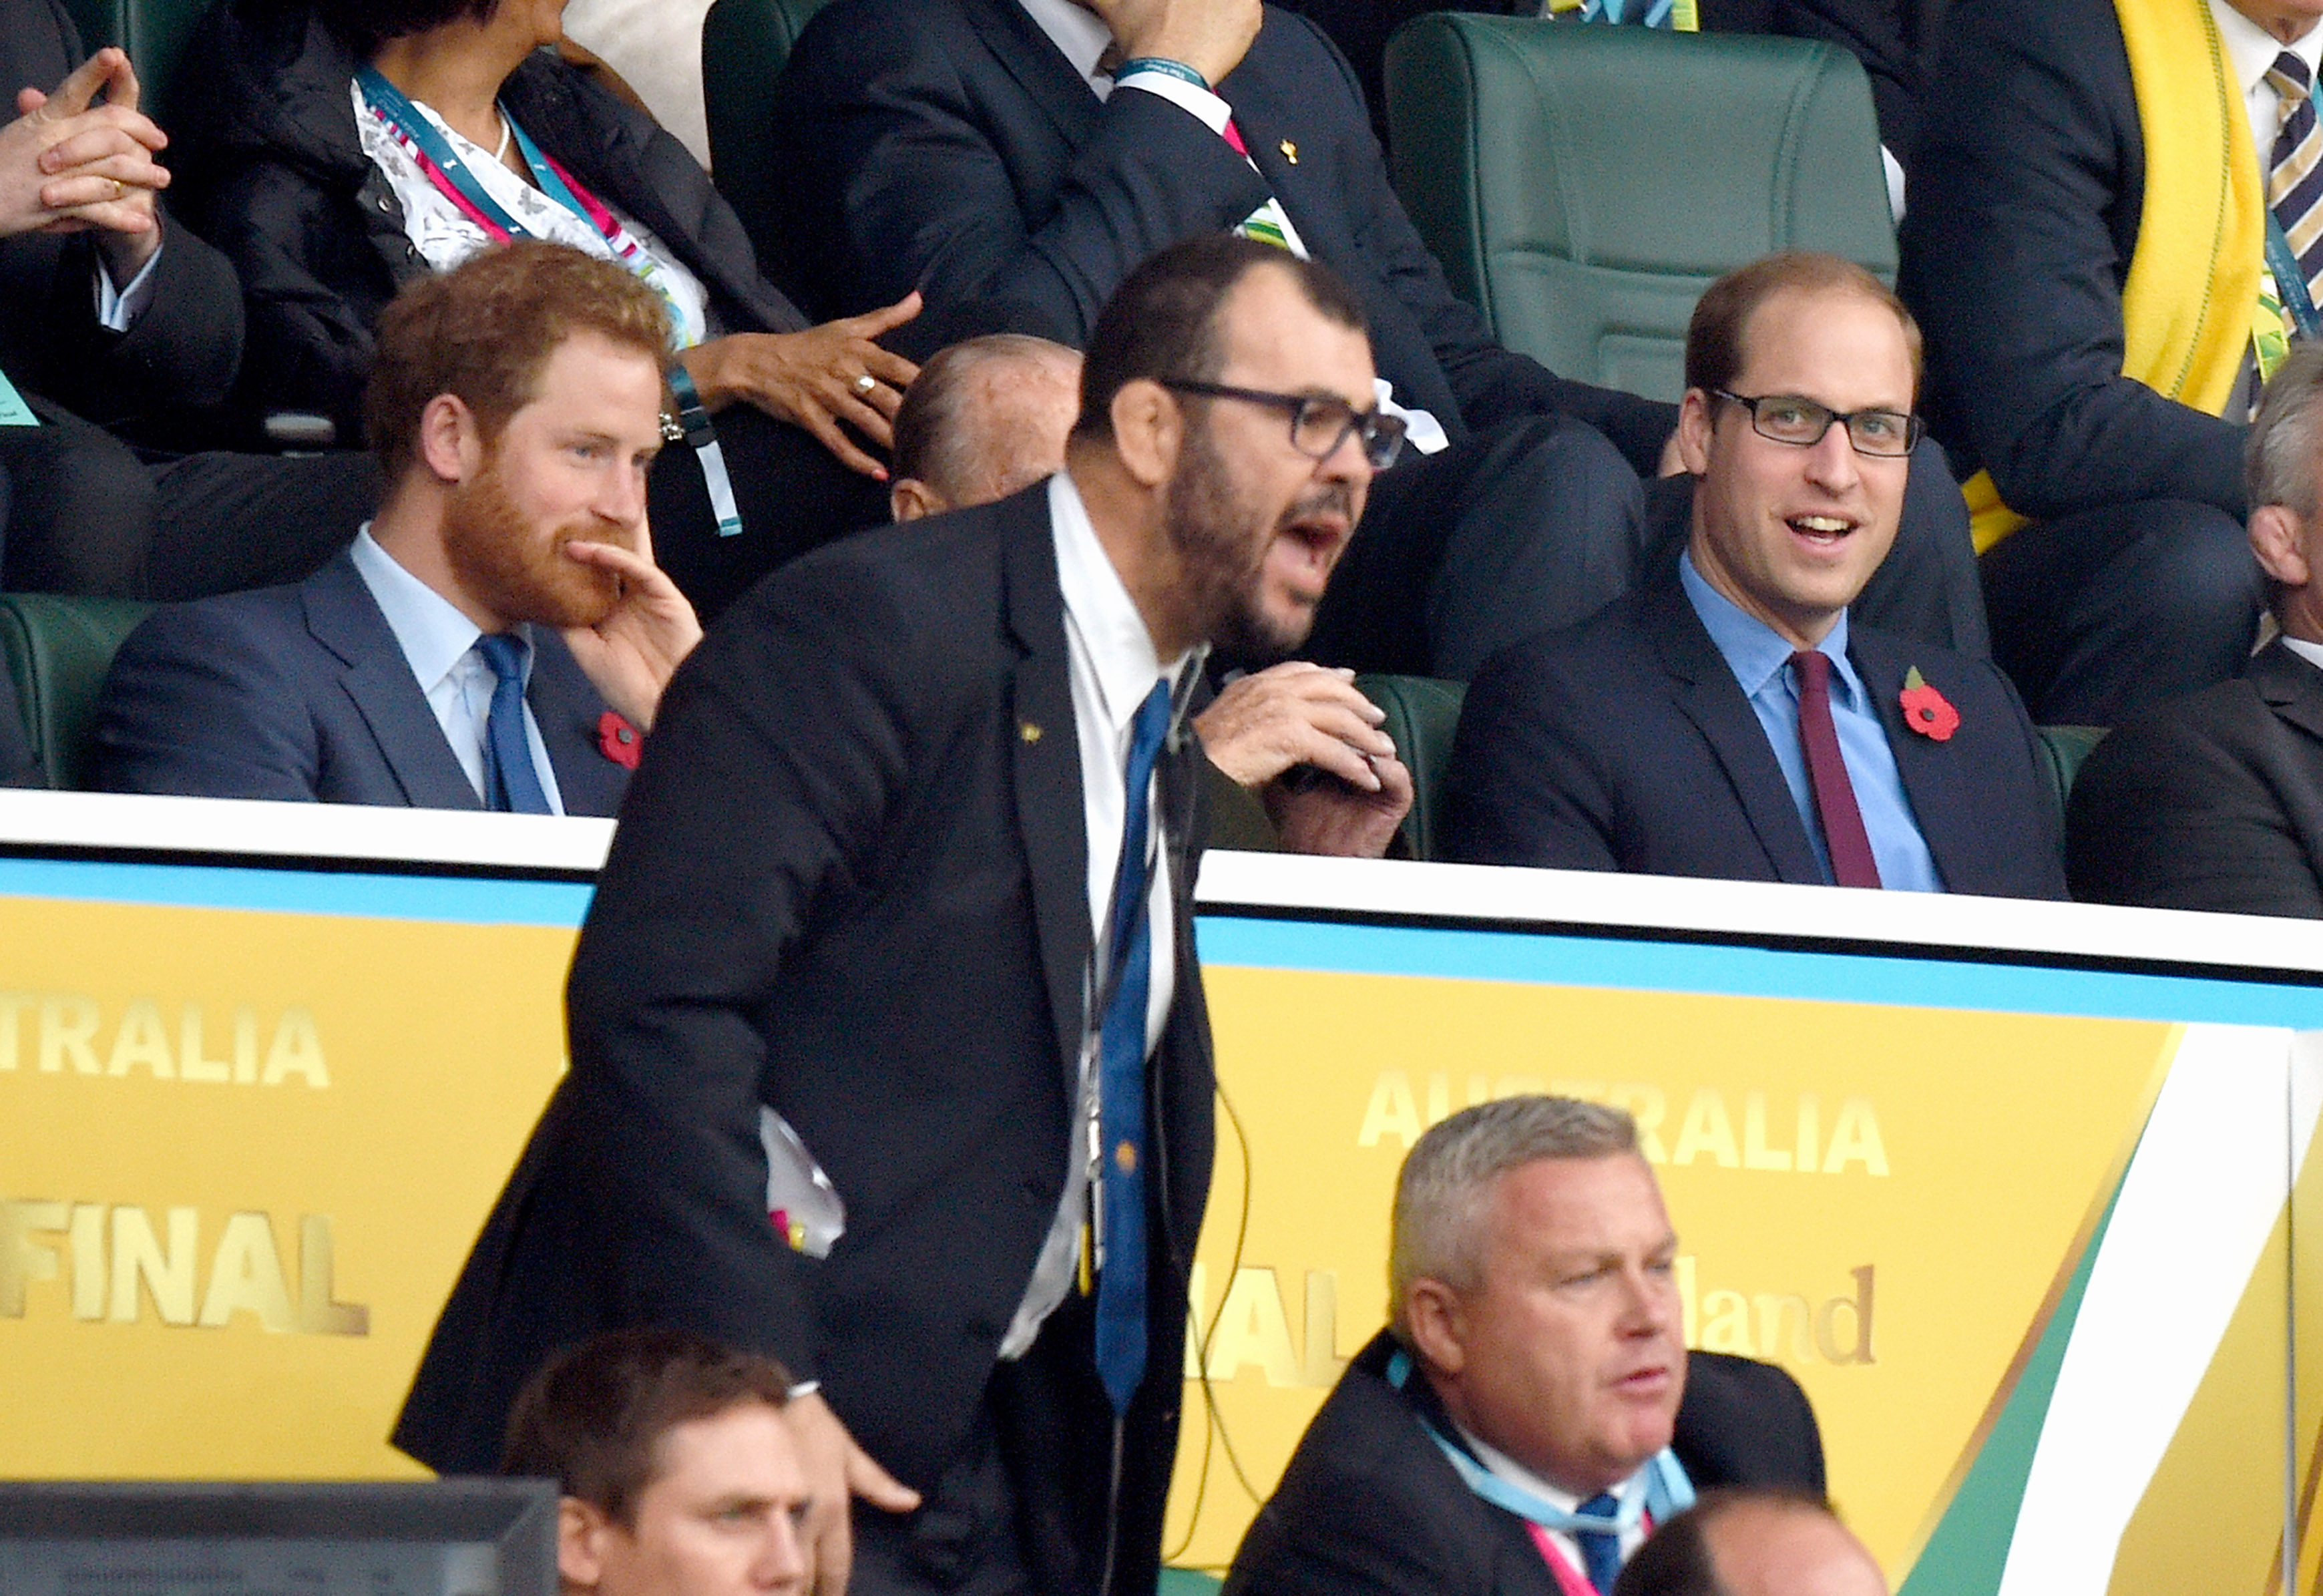 Princes Harry and William can be seen sitting in a rugby stand seated behind a yelling Australian coach